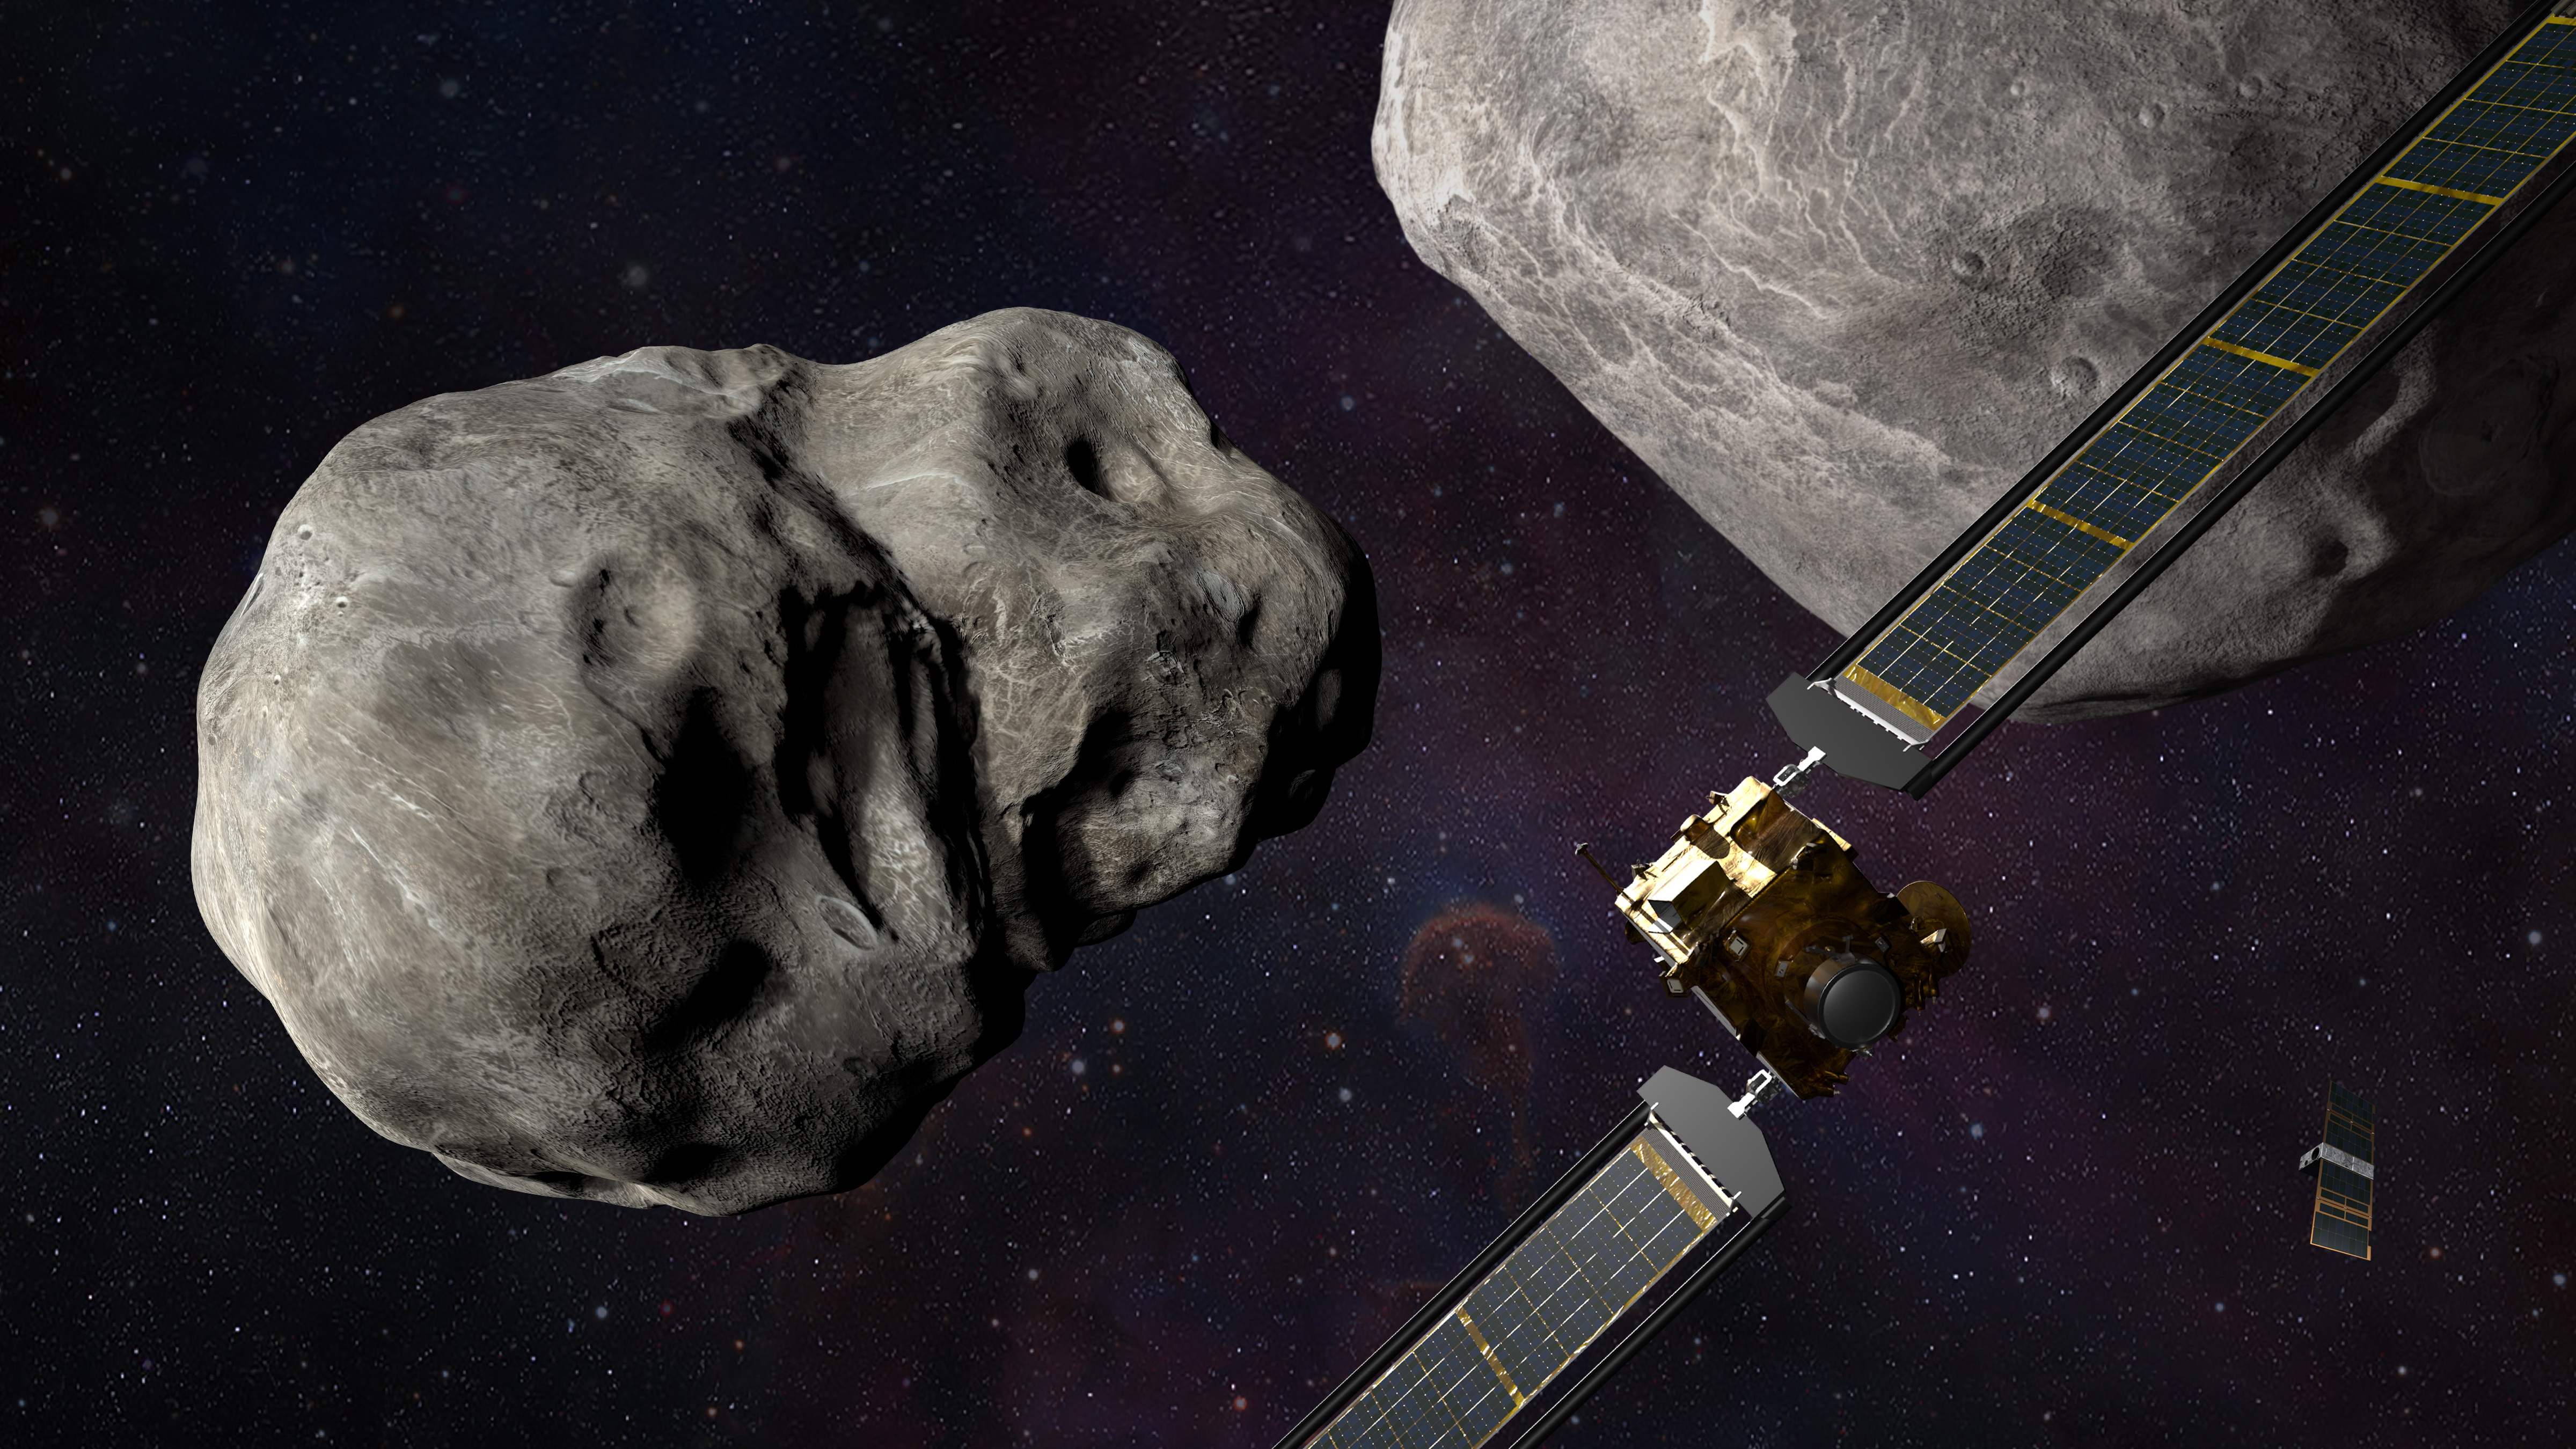 An undated image provided by NASA shows an image of the Double Asteroid Redirect Test (DART) spacecraft prior to impact on the binary Didymos asteroid system.